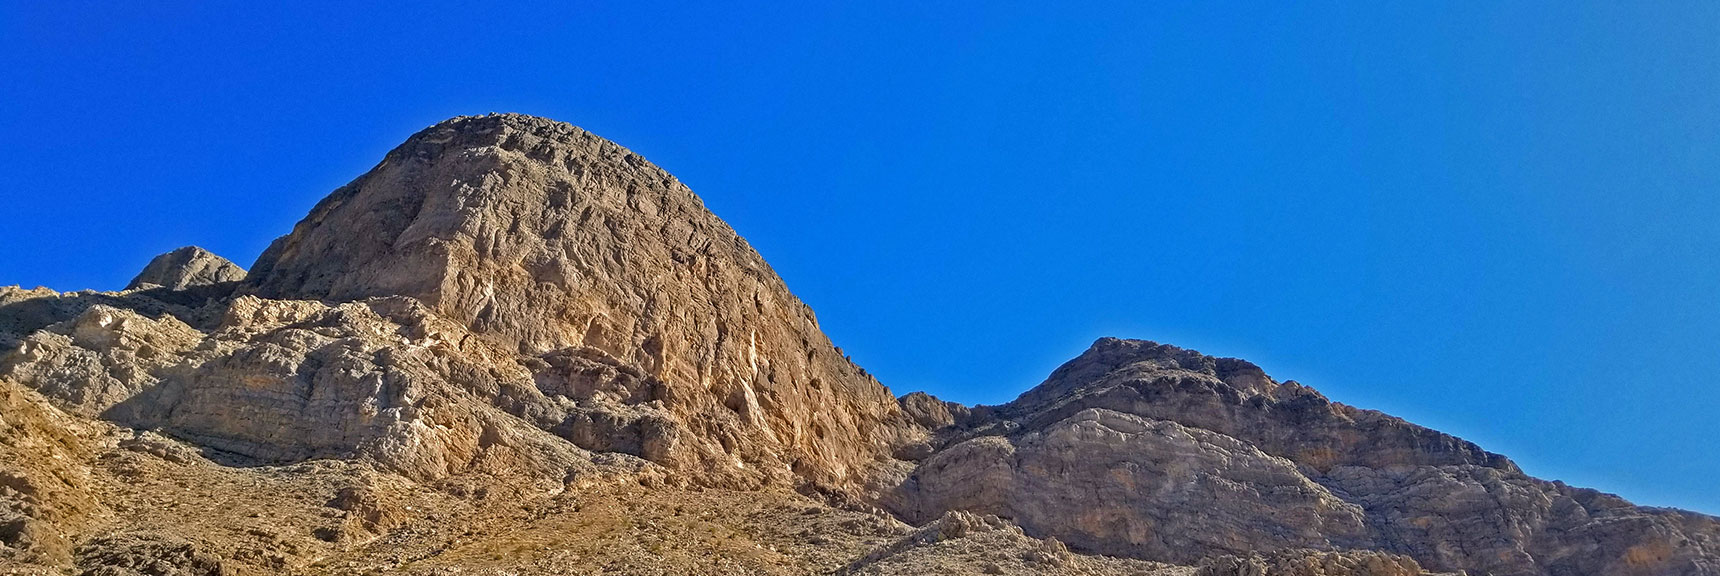 Sheer Cliffs on West Side of Mts. Possible Approach Through the Saddle Between the Two | Little La Madre Mt, Little El Padre Mt, Little Burnt Peak | Near La Madre Mountains Wilderness, Nevada